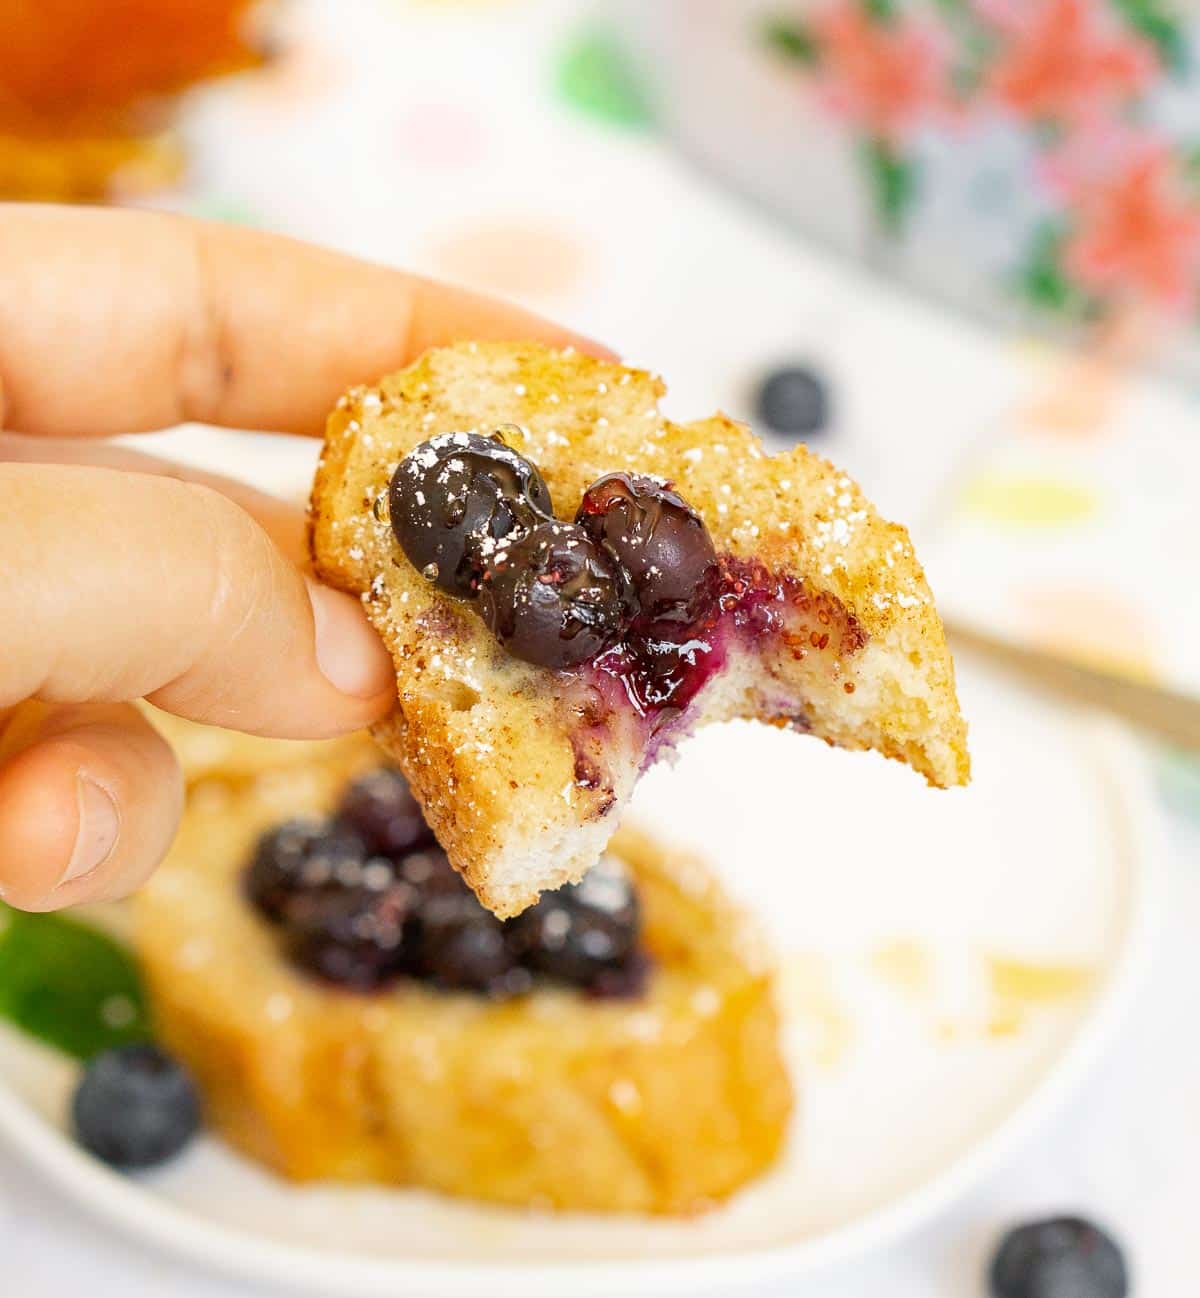 Hand holding piece of baguette French toast with blueberries with a bite taken out to show texture